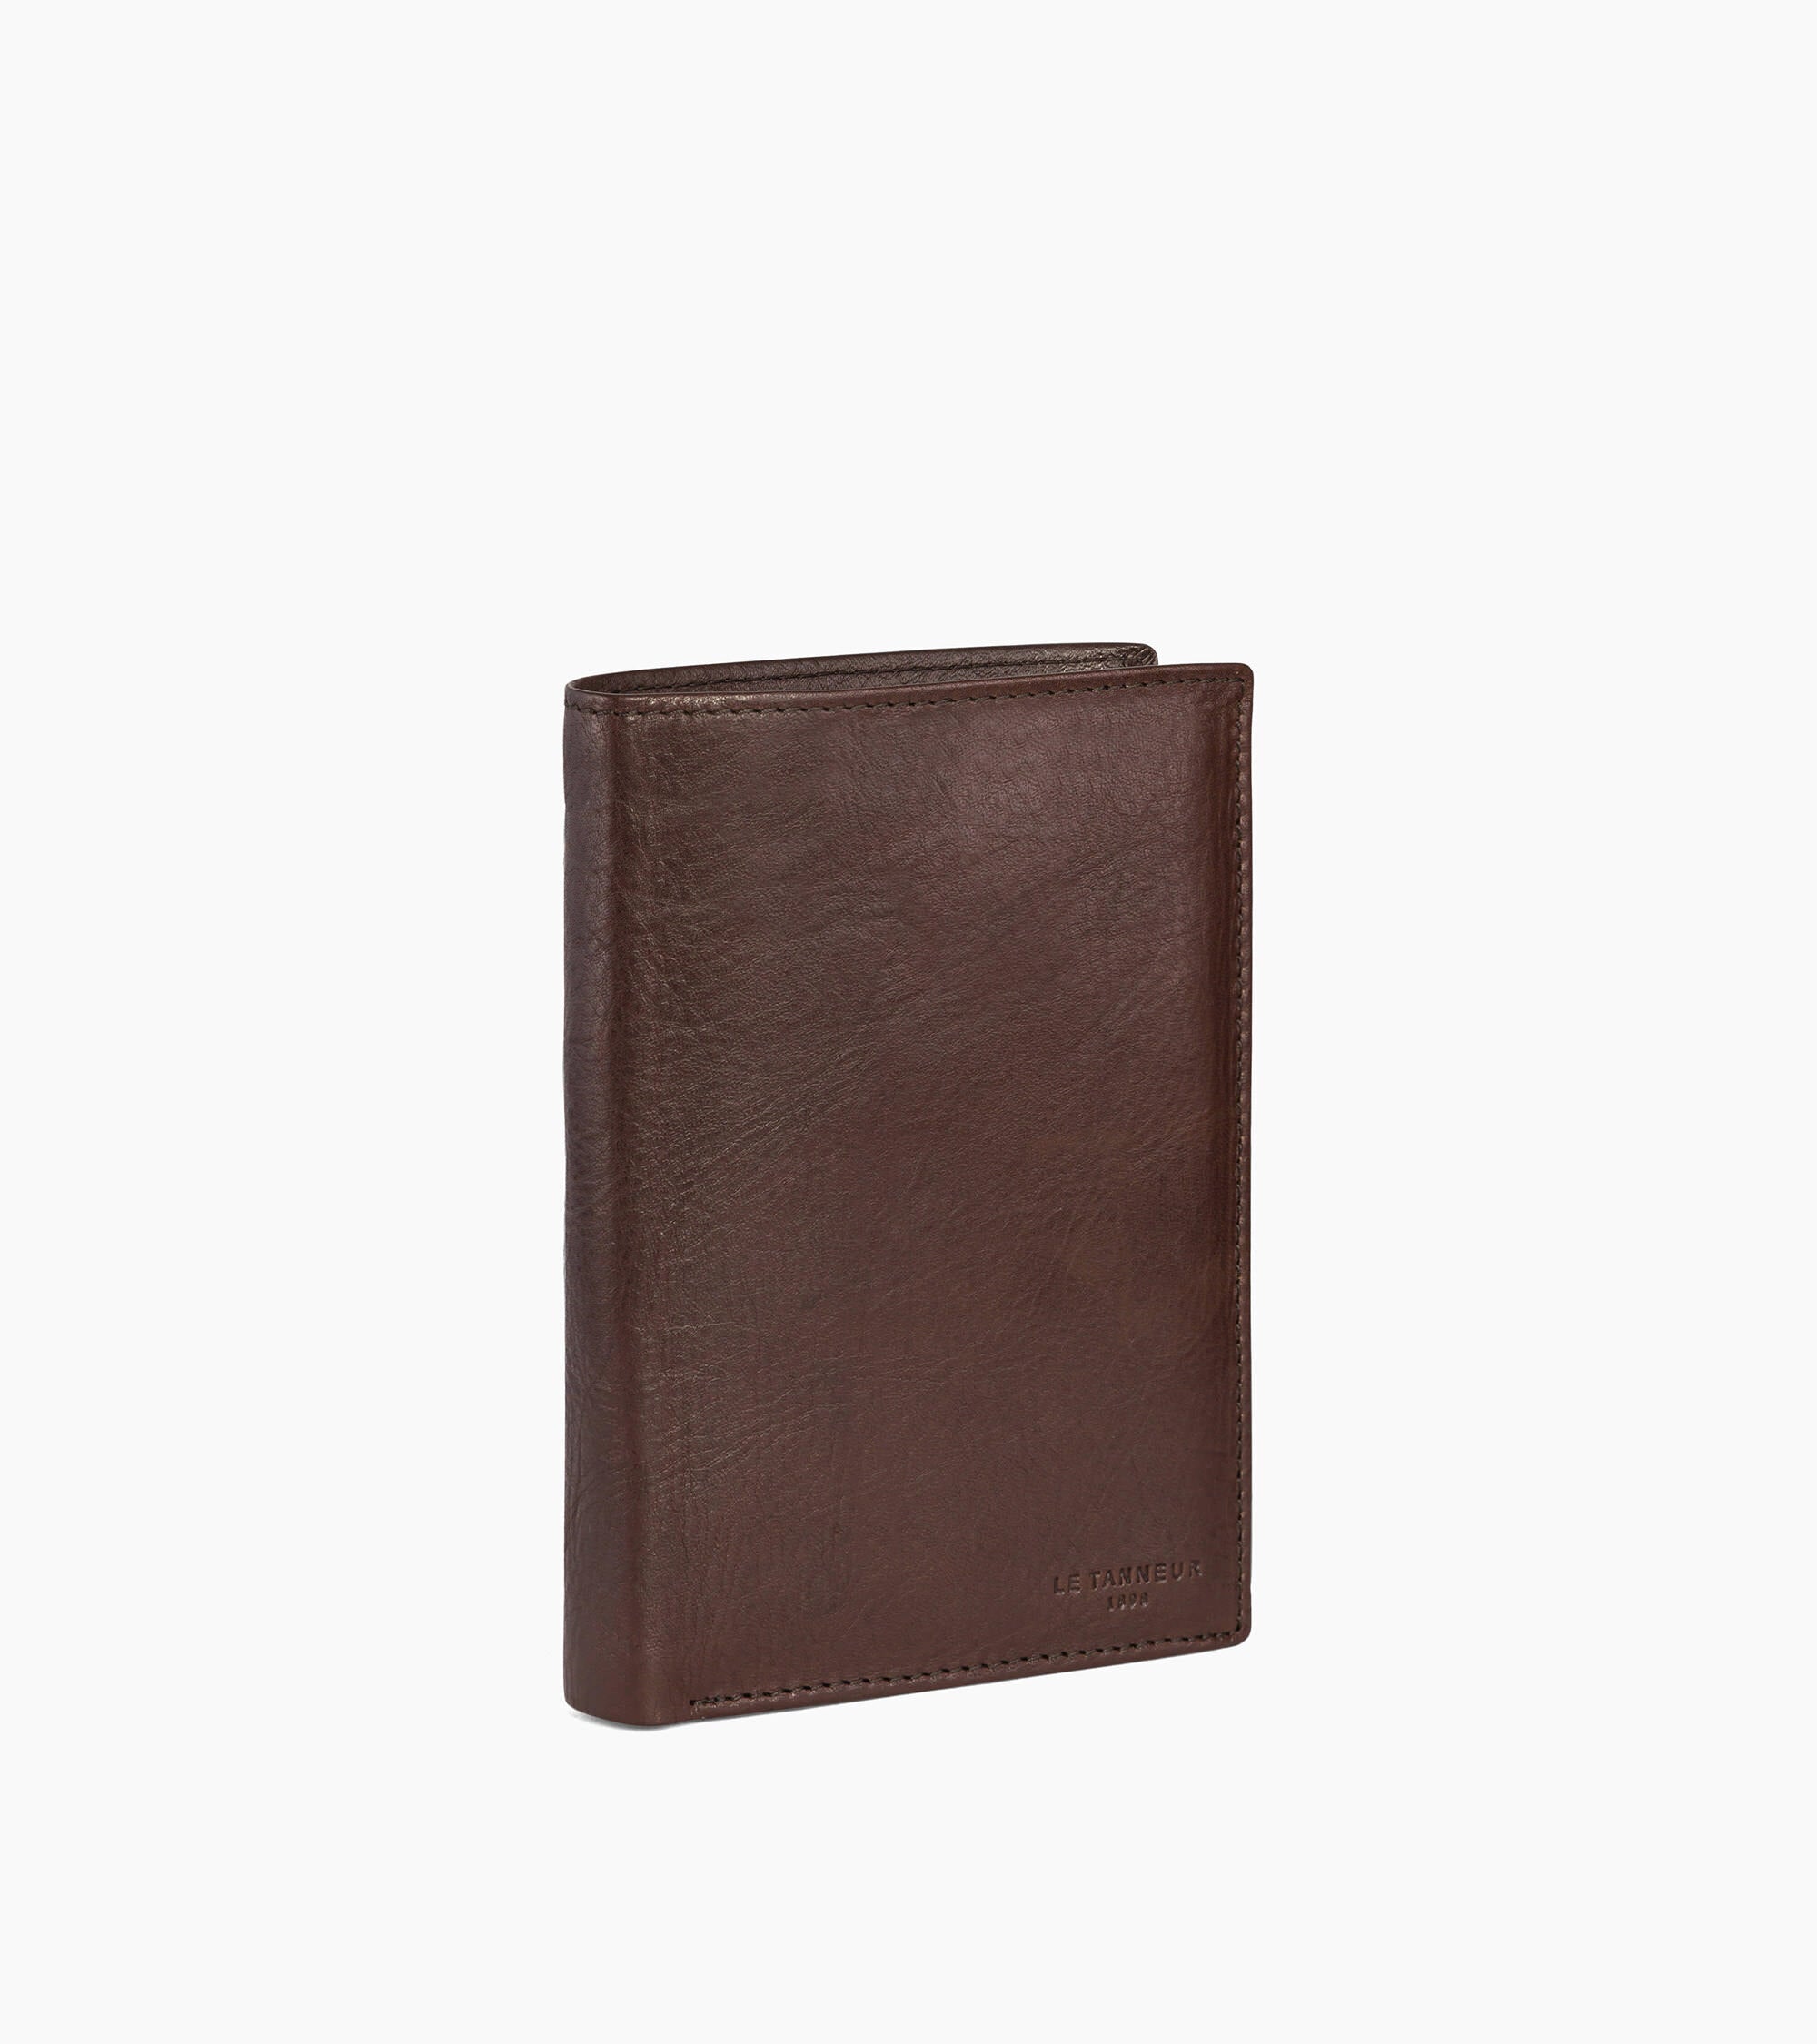 Gary medium zipped wallet with 3 shutters in oiled leather